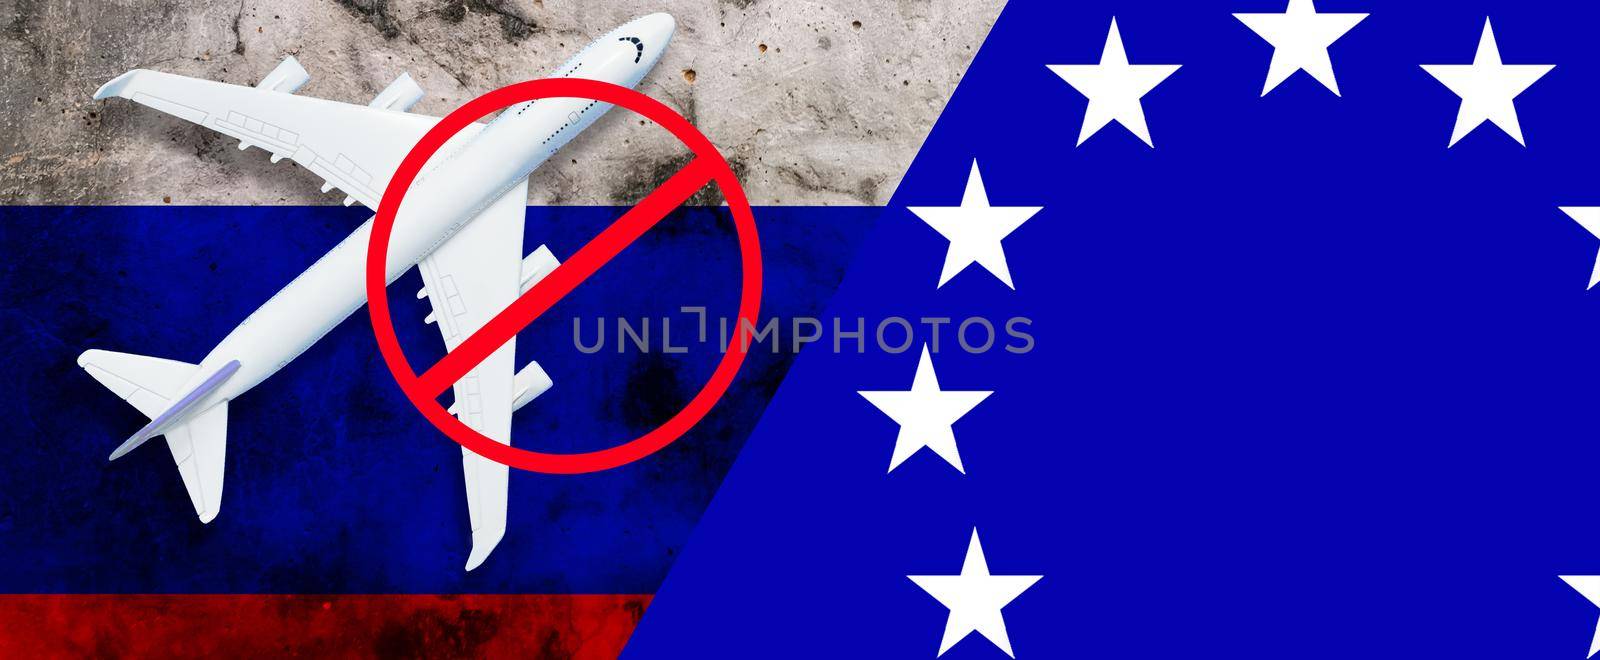 Russian flag, toy plane and barbed wire on blue background, concept of banning aircraft departing from Russia. by Andelov13